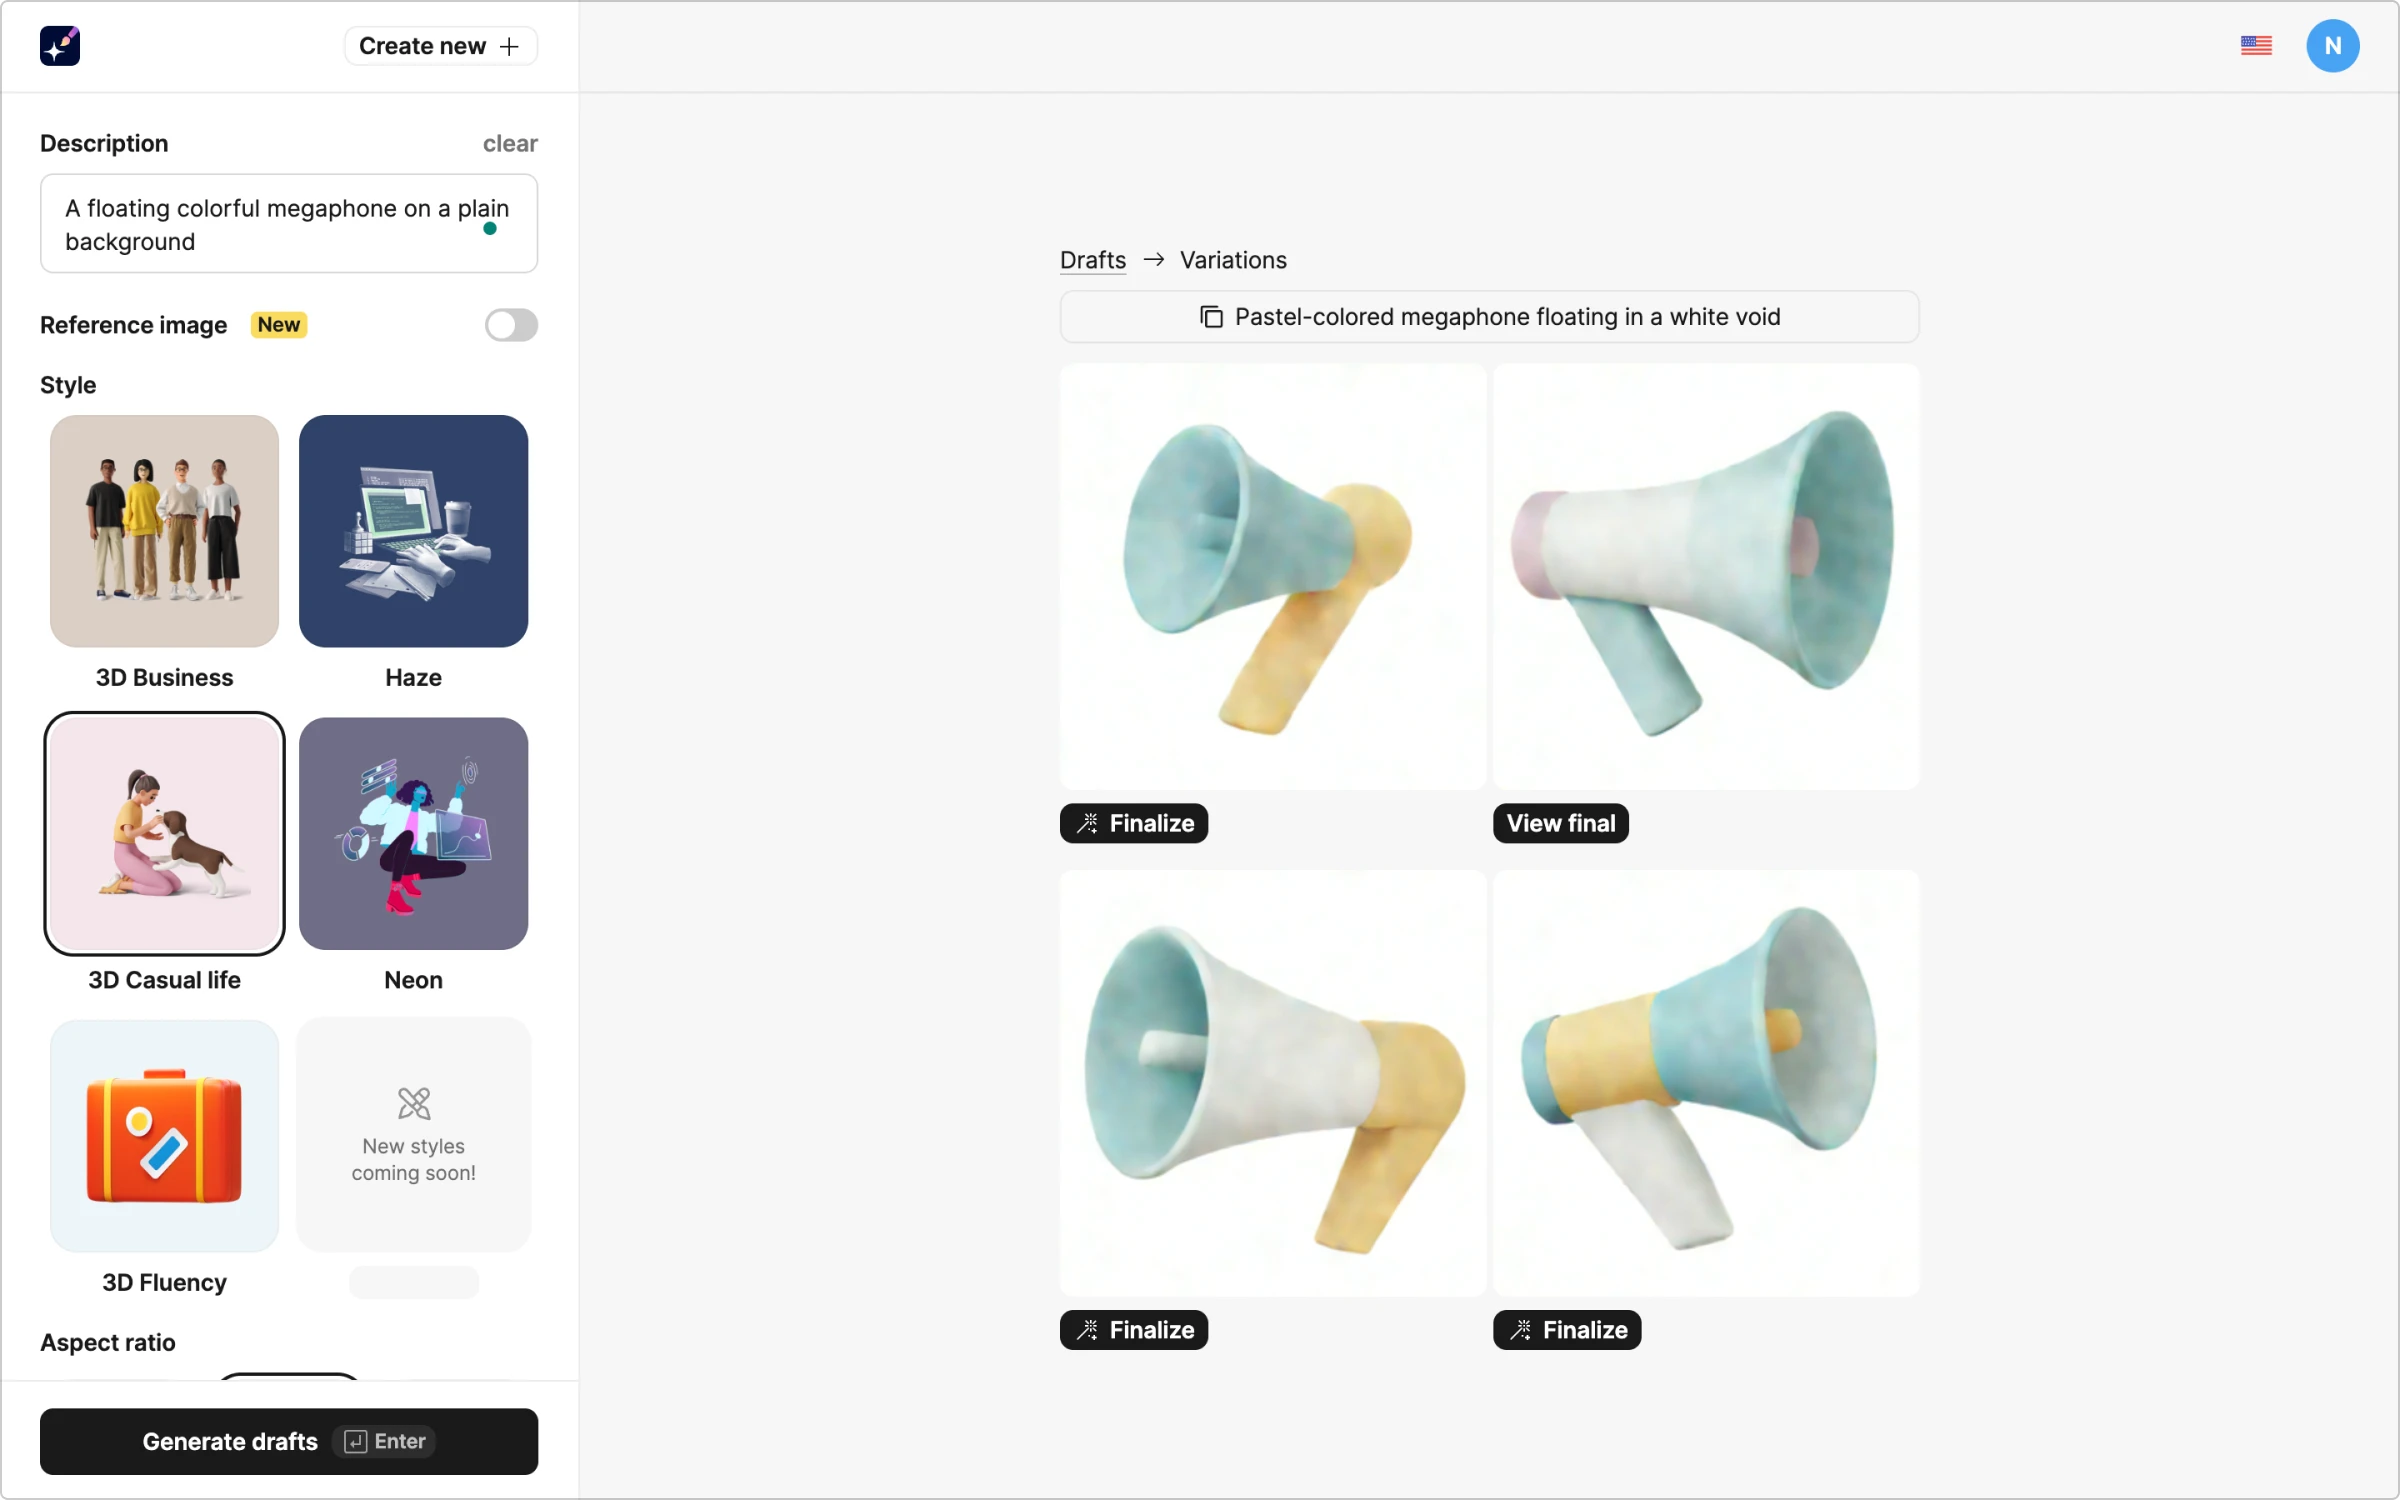 AI-generated drafts of pastel-colored megaphone floating in a white void illustration